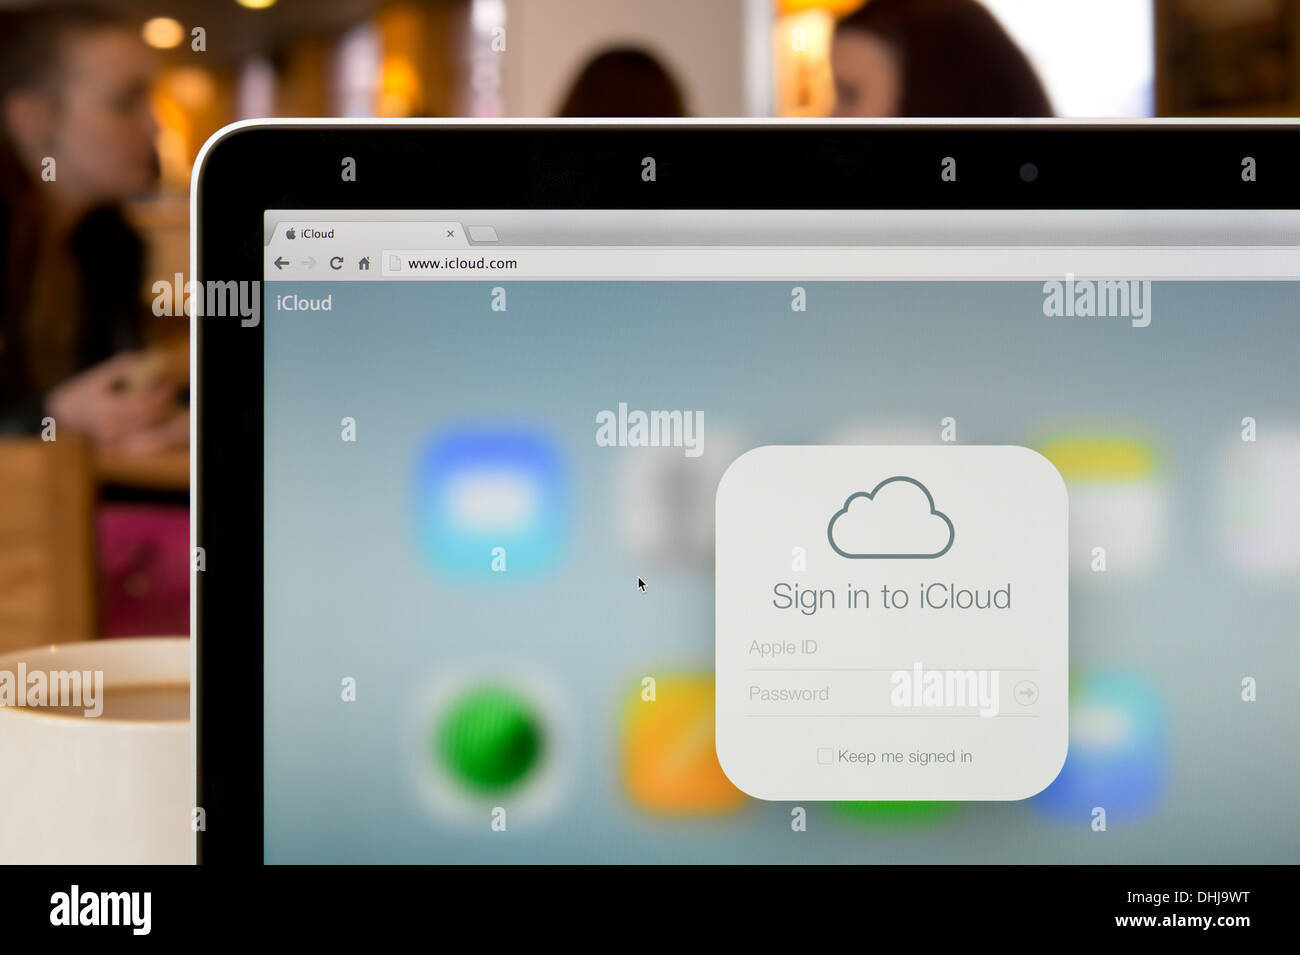 The iCloud logo as seen on the Apple website shot in a coffee shop environment (Editorial use only). Stock Photo